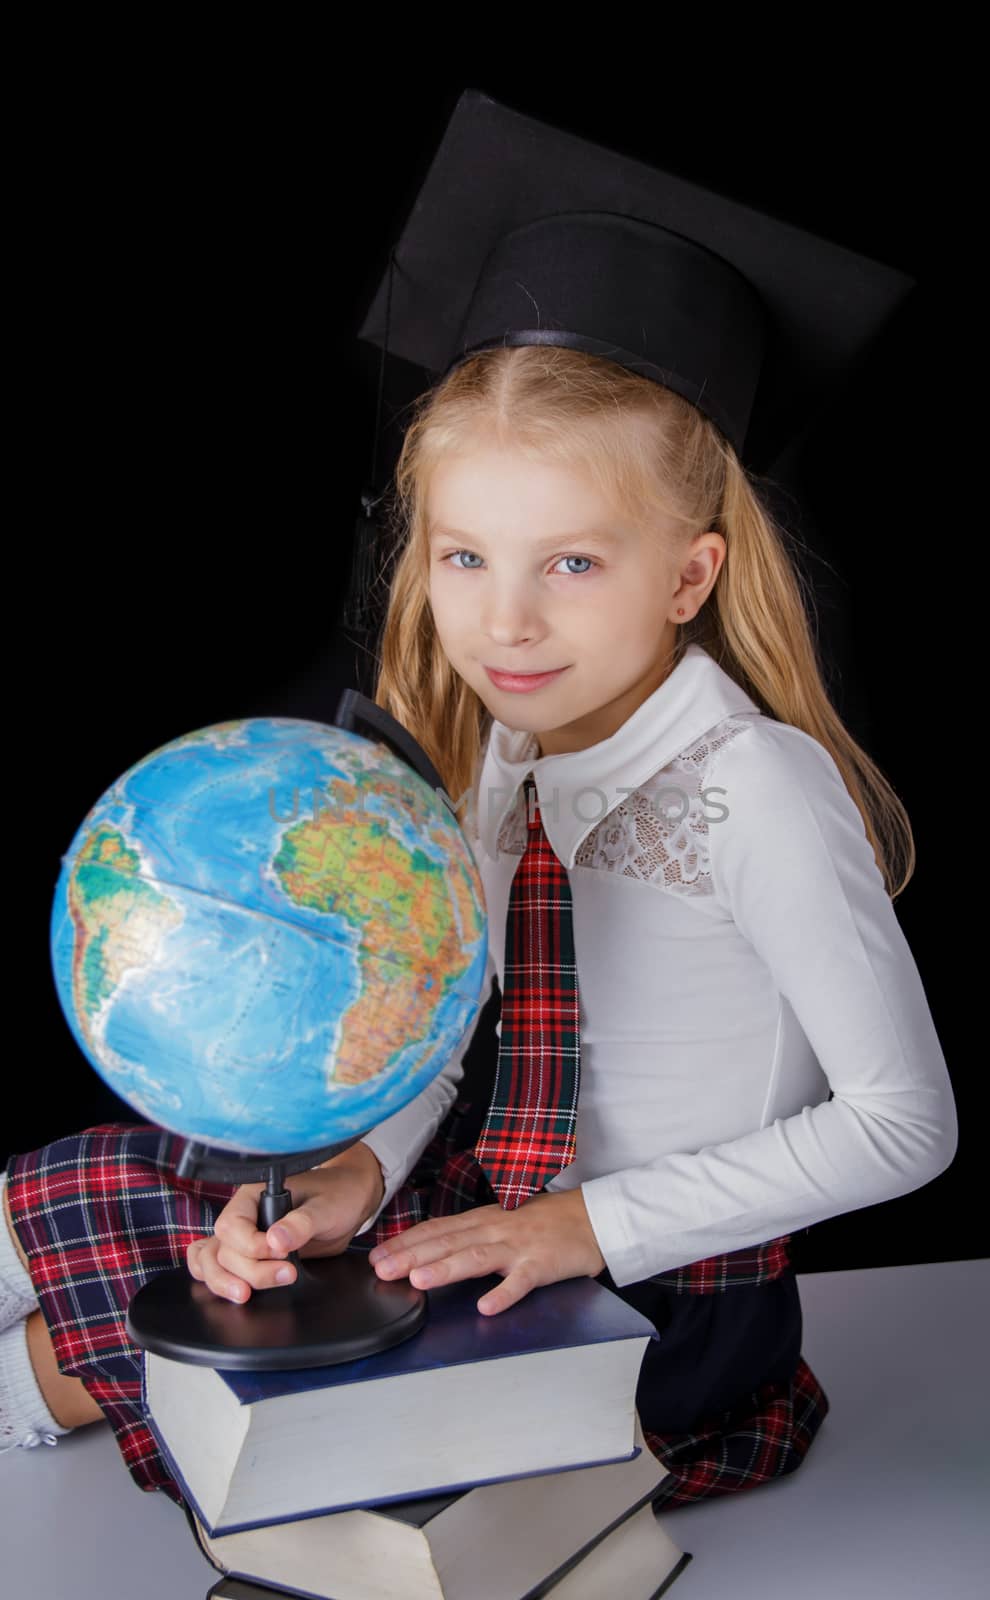 Schoolgirl with hat and globe sitting on black background, education and school concept